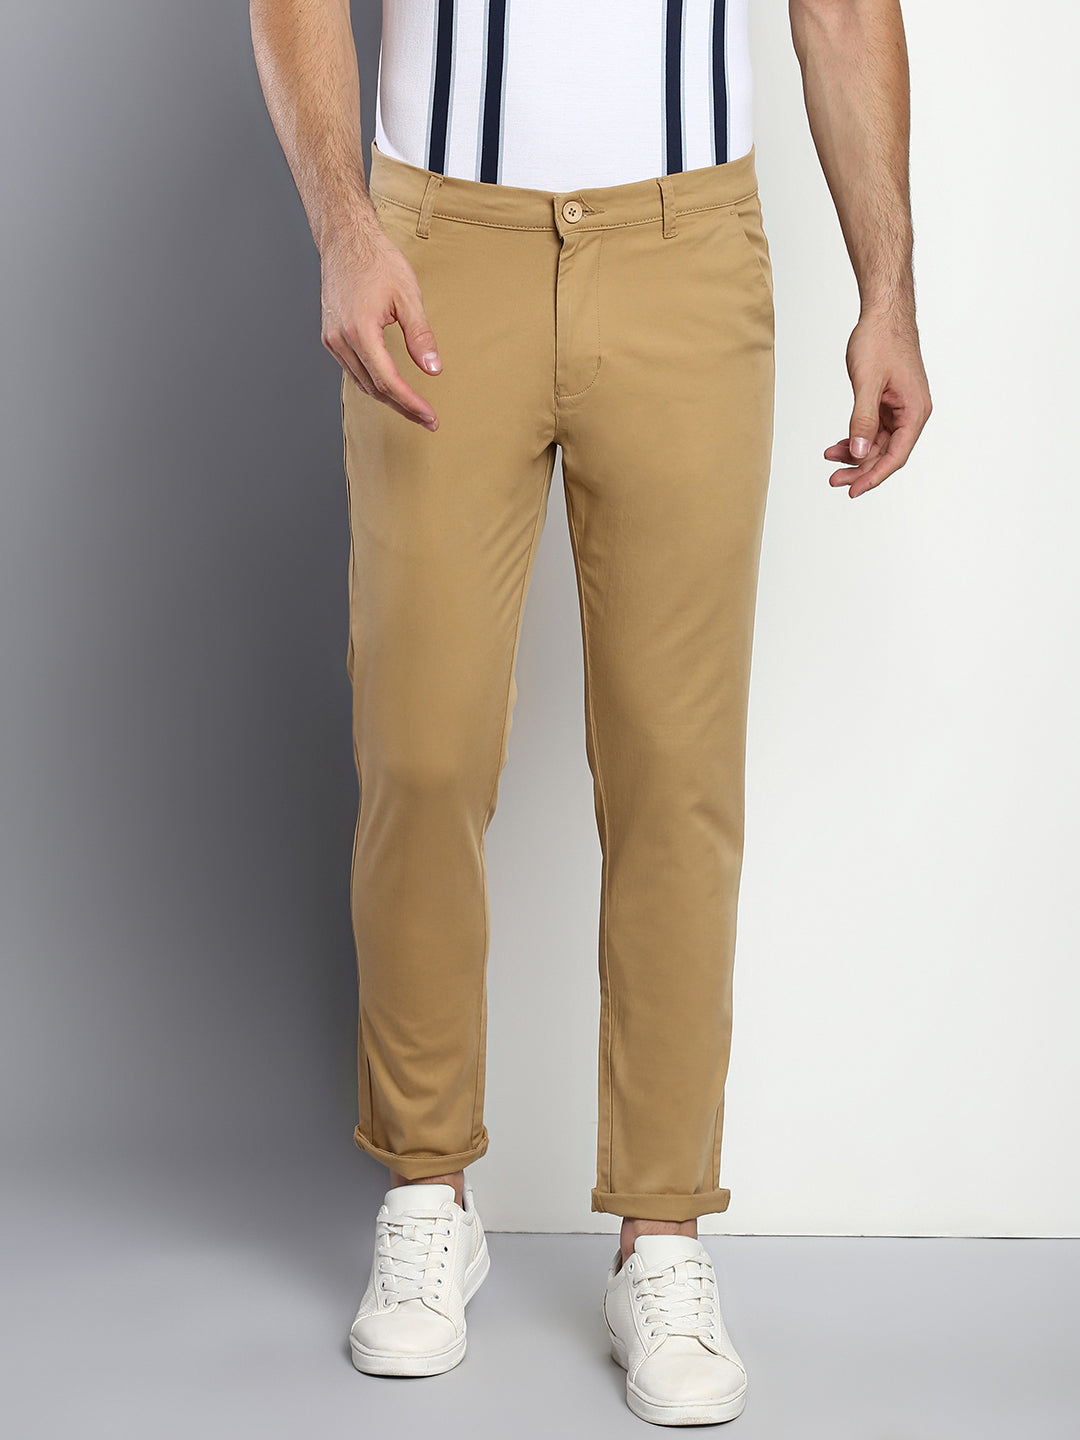 Beige Pant Outfit Ideas For Men  Beige Pant Combination Ideas  by Look  Stylish  YouTube